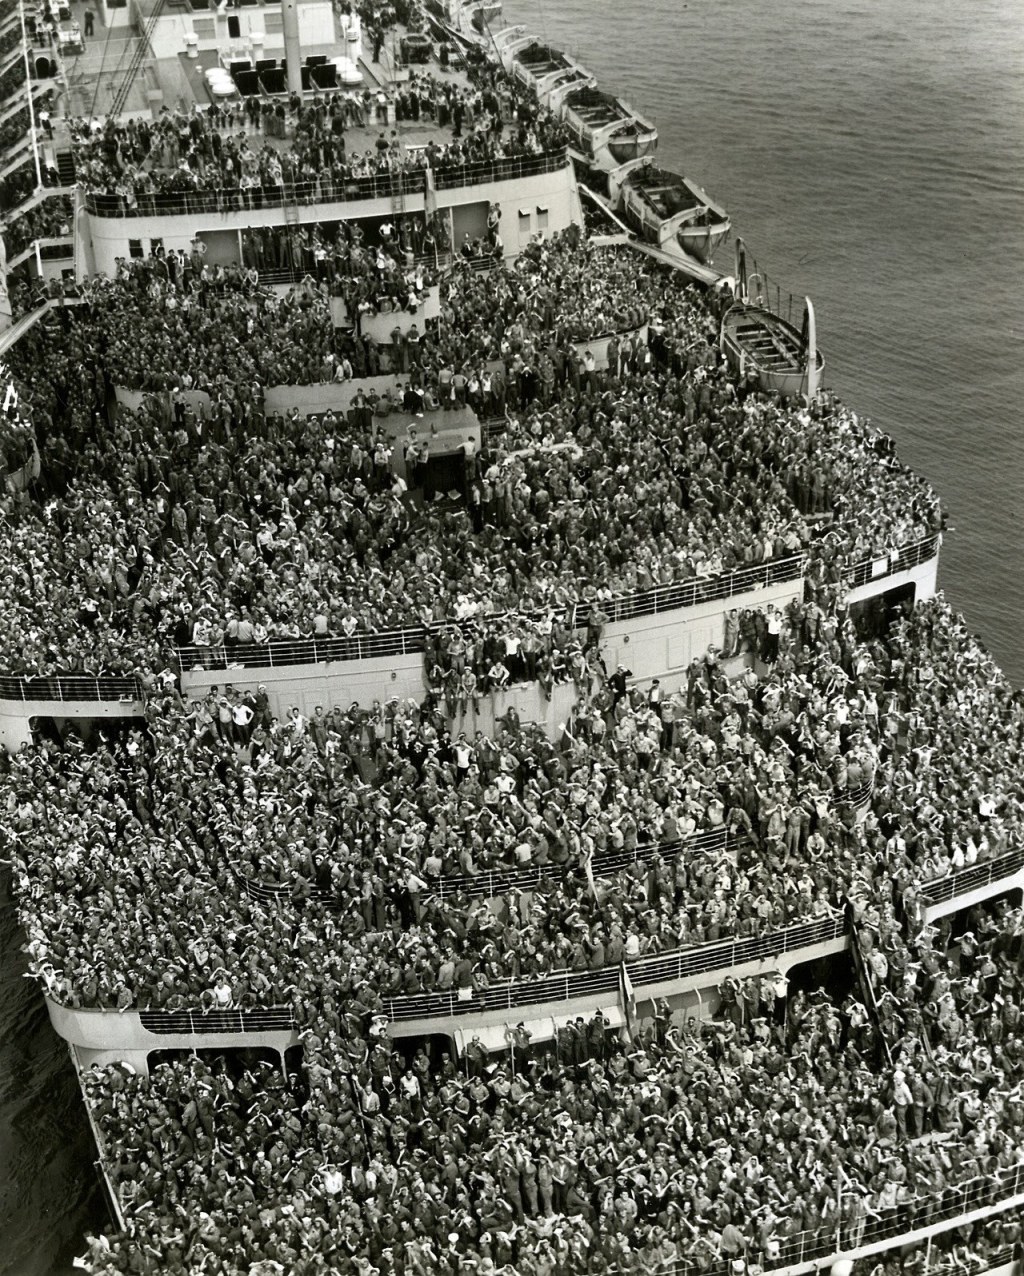 Picture of: Crowded ship bringing American troops back to New York harbor